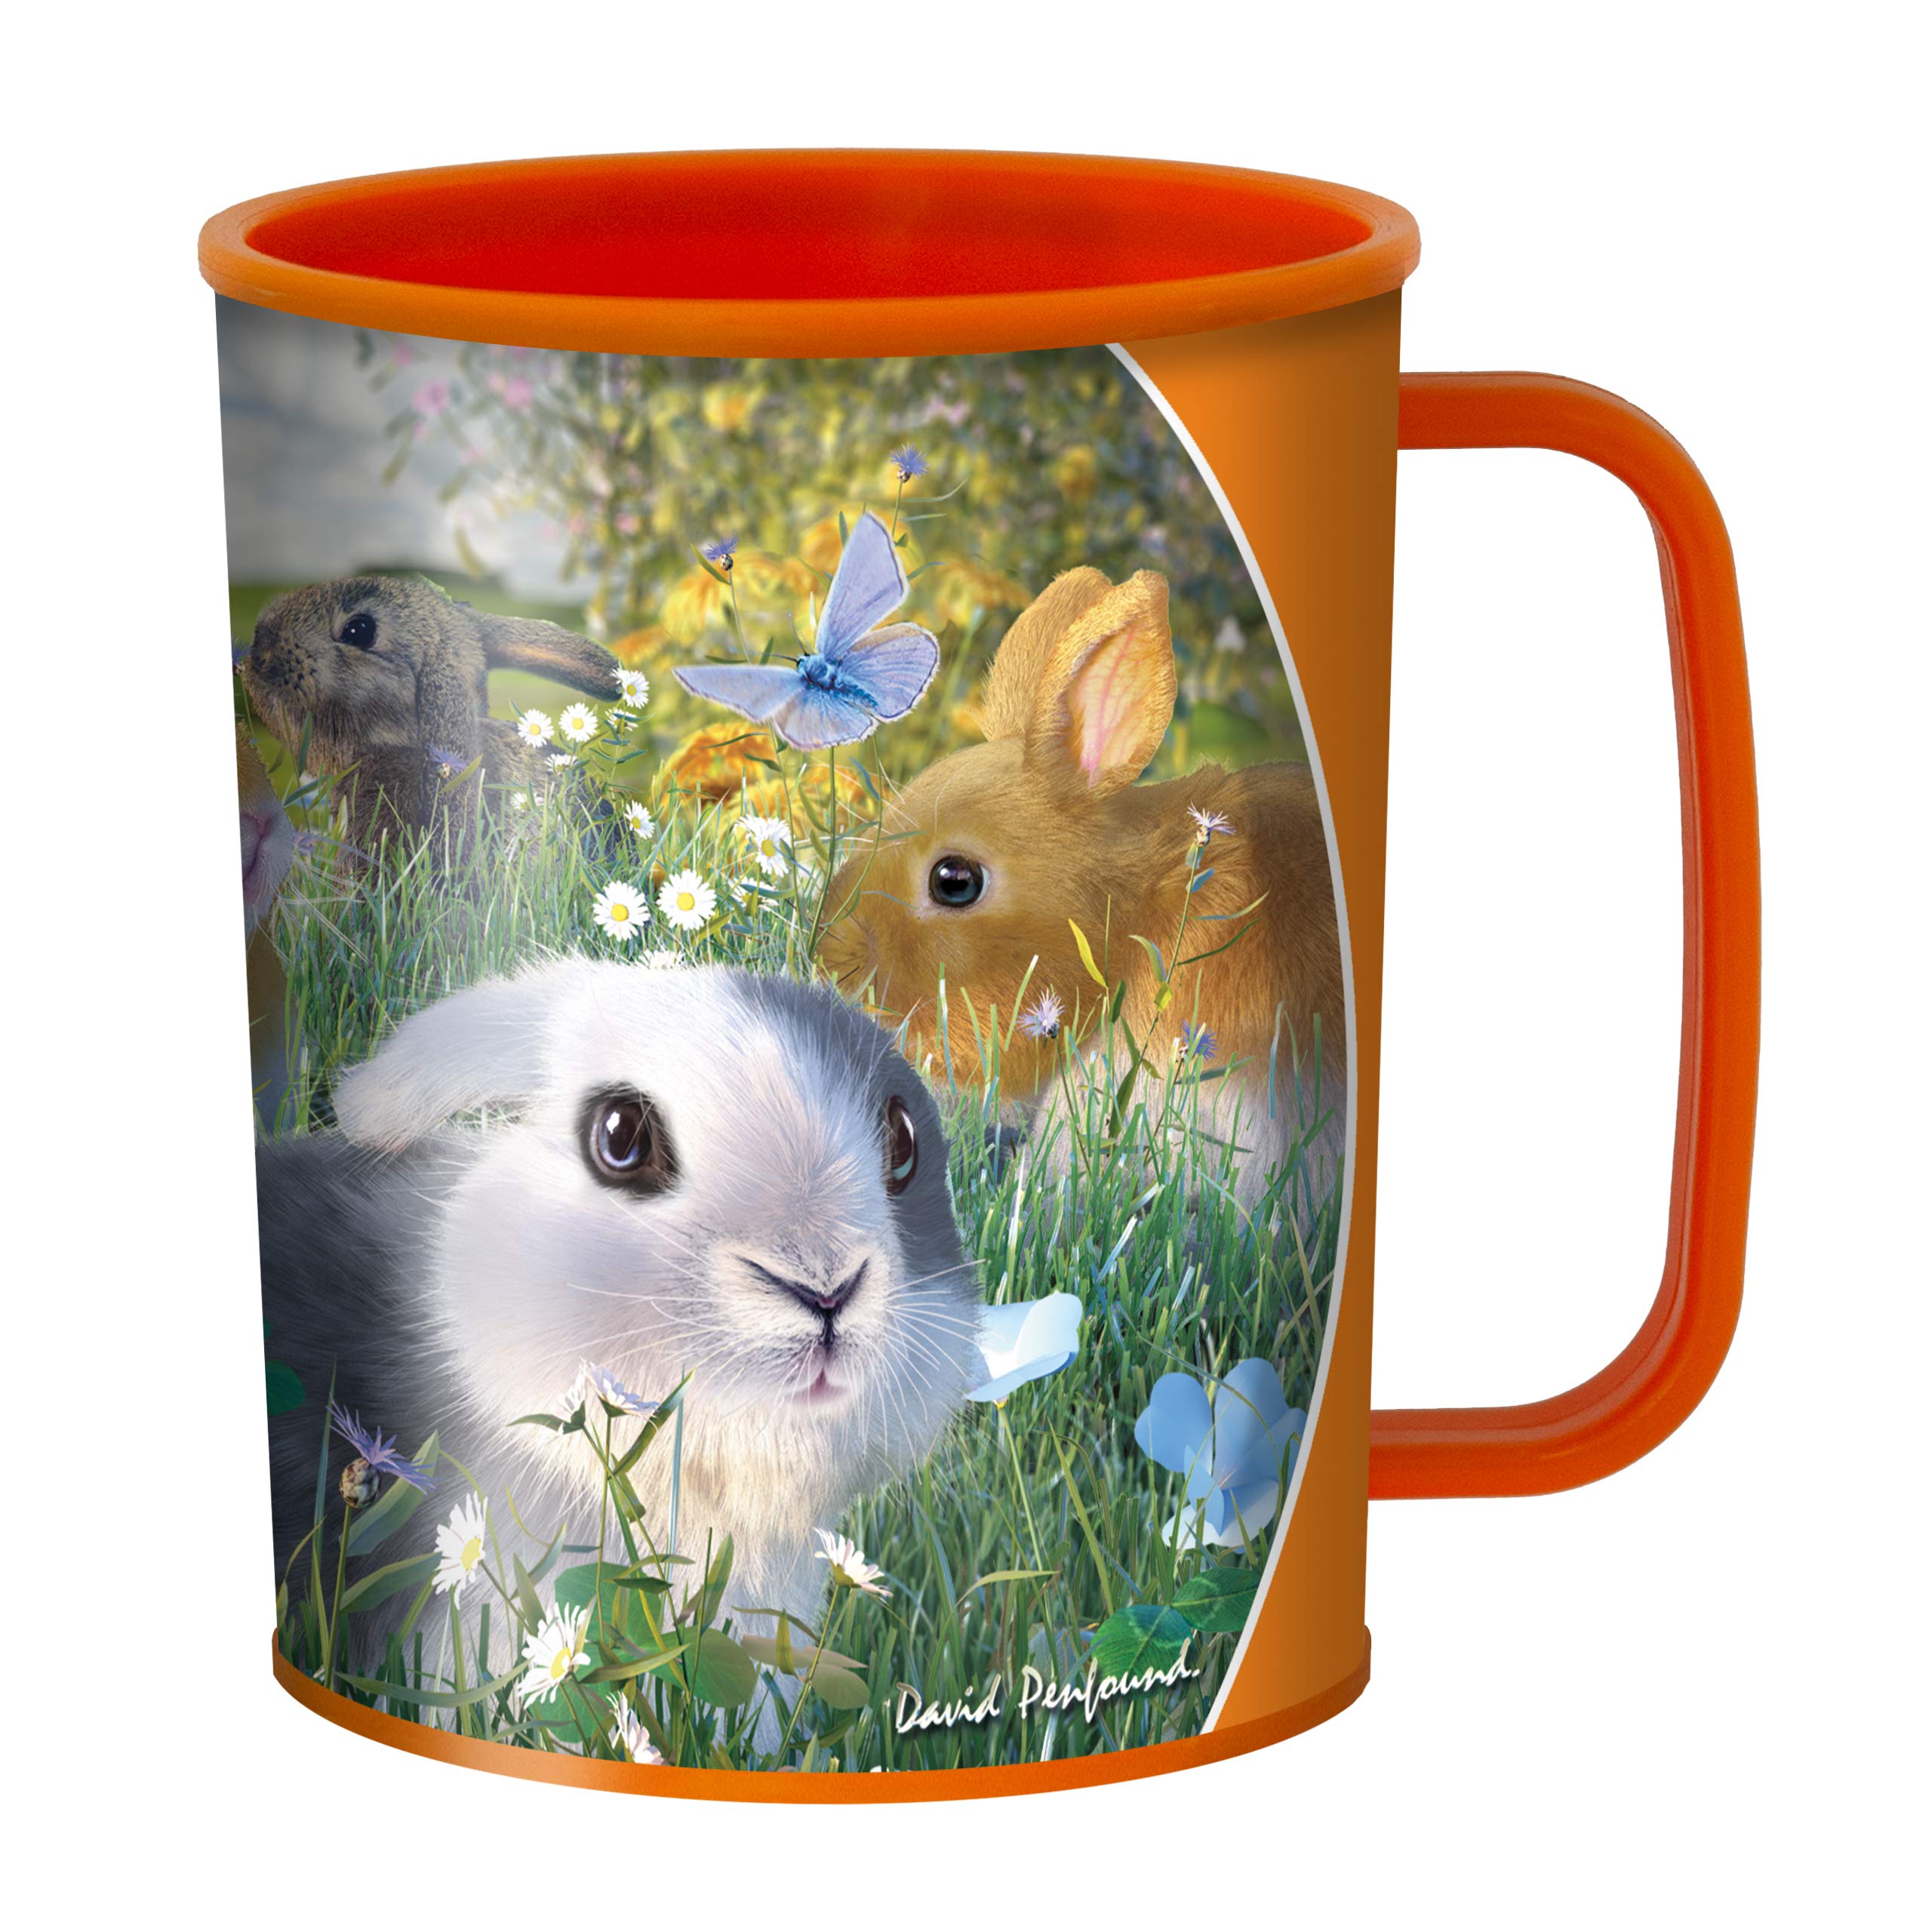 3D LiveLife Drinking Cup - Bunnies from Deluxebase. 3D Lenticular Bunny Rabbit Kids Cups. 10fl oz plastic cups for kids with ori